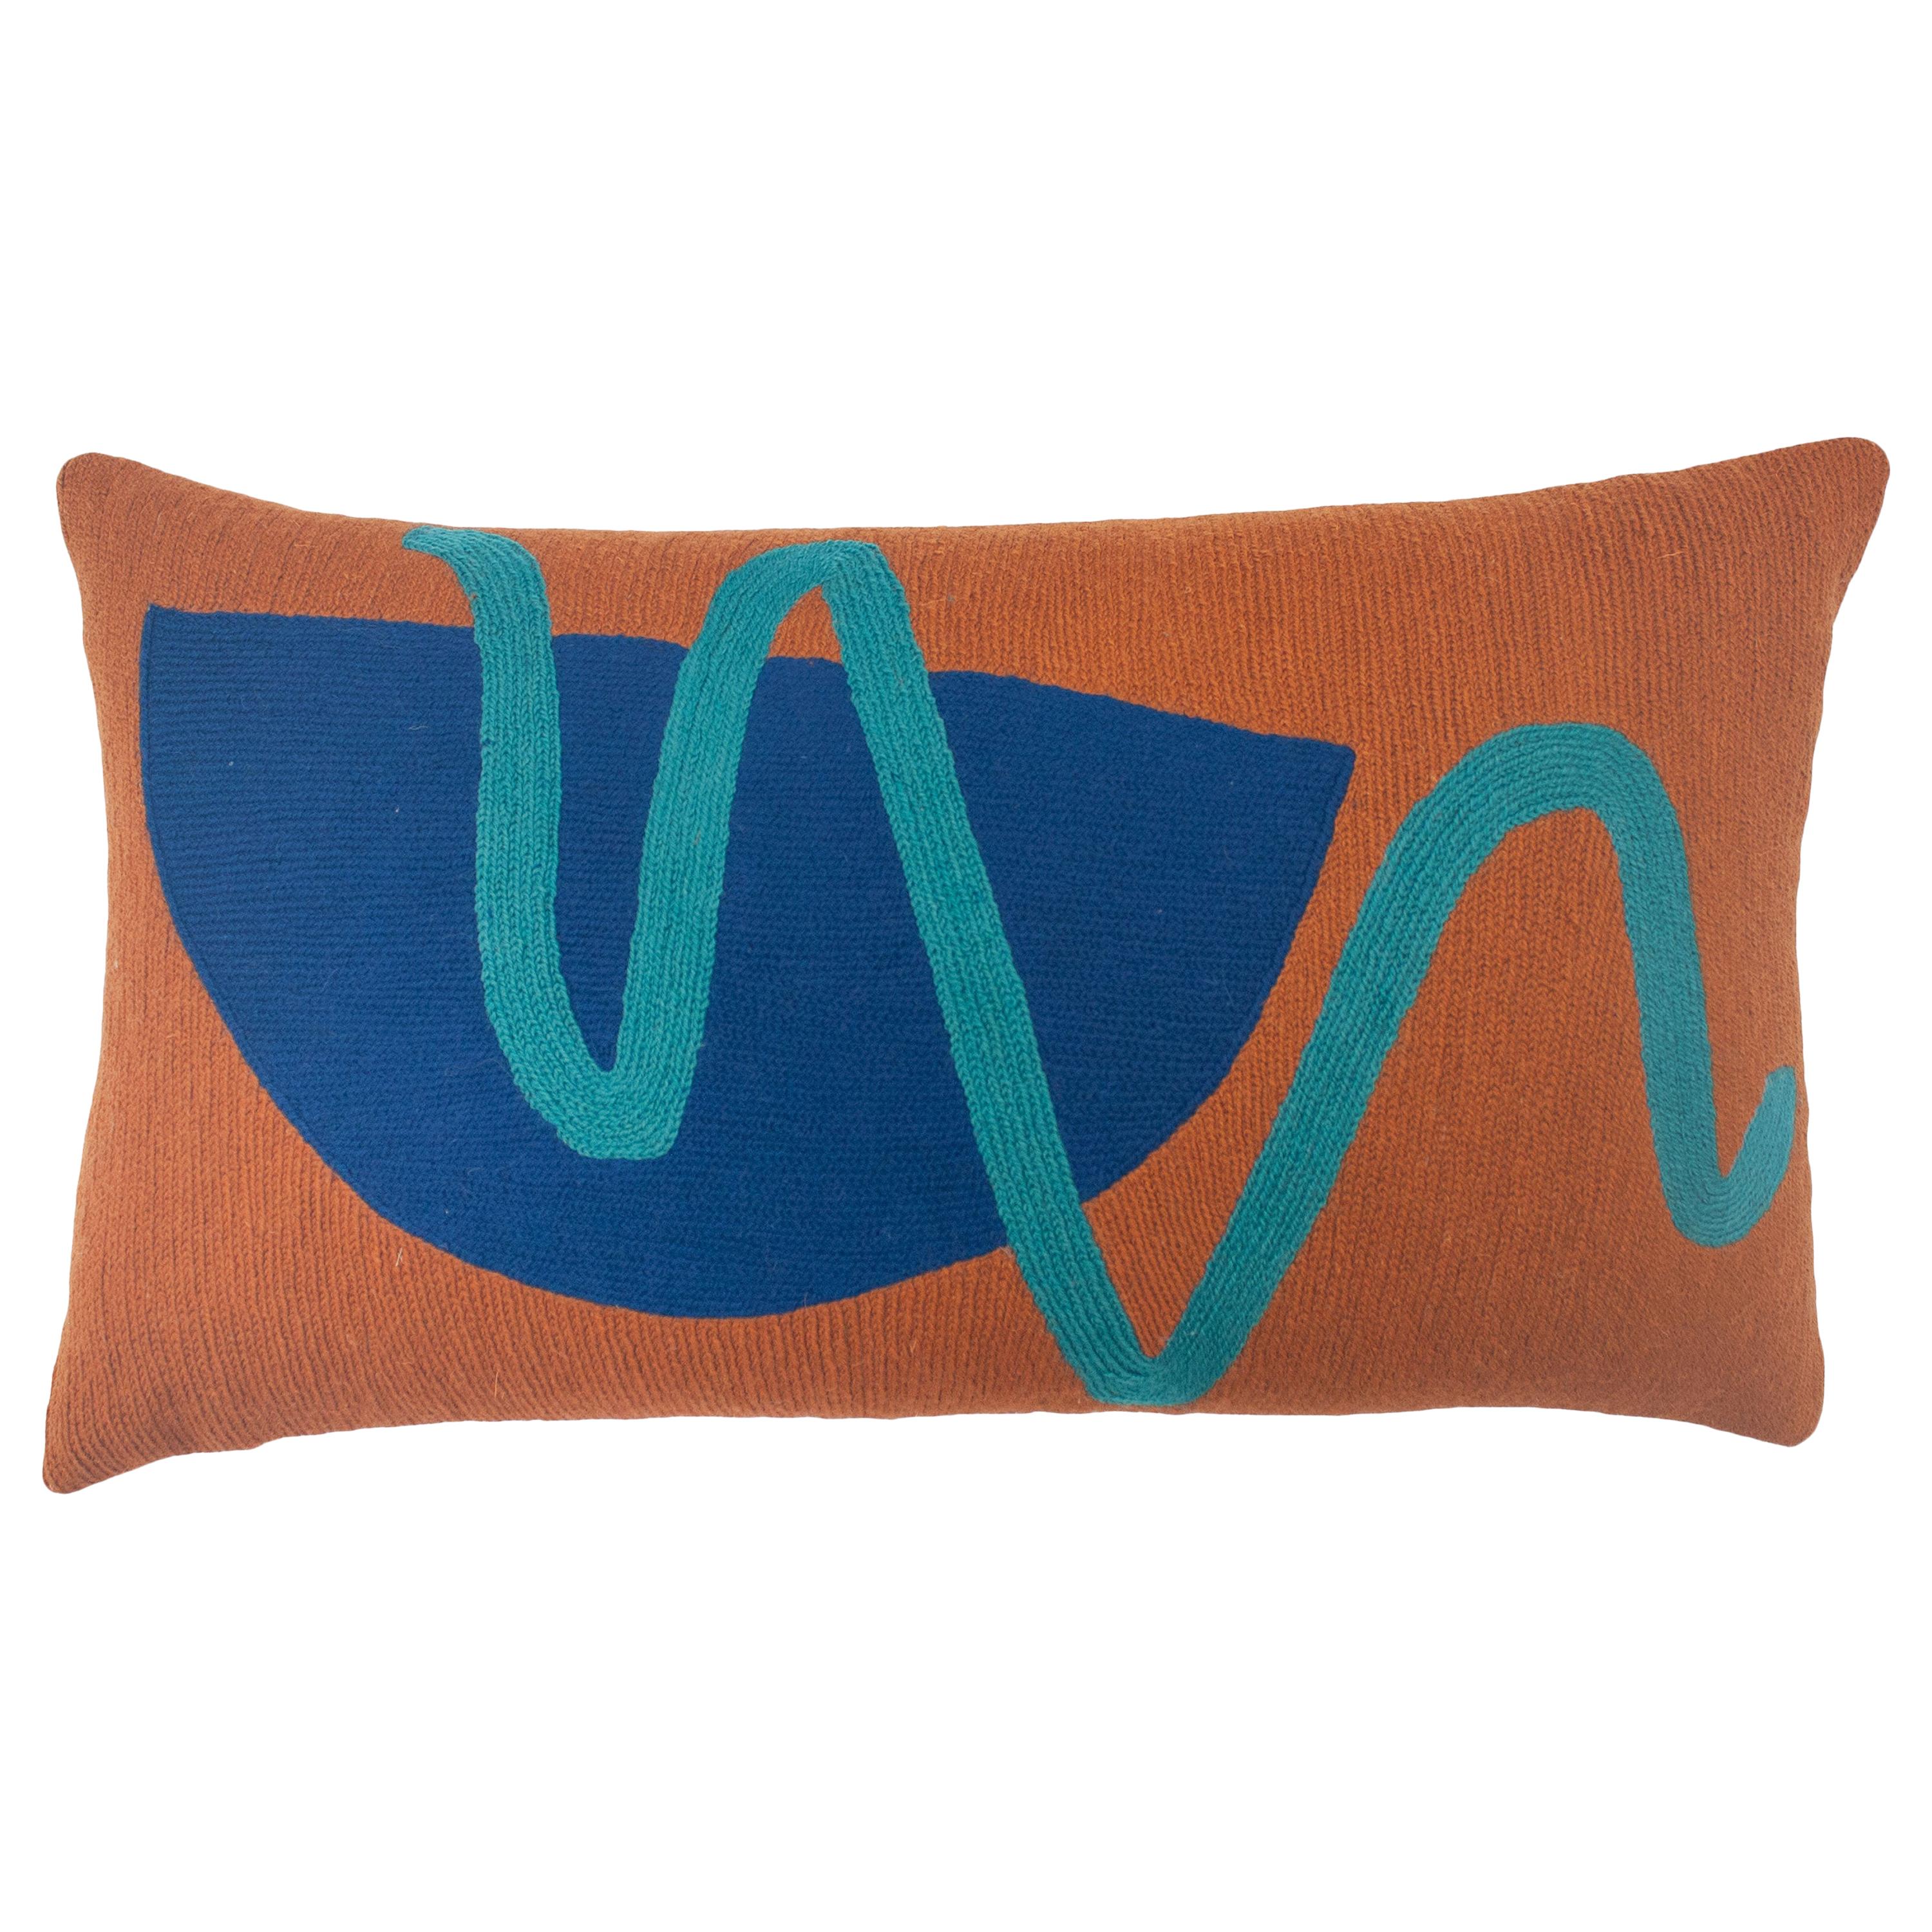 Blah Blah Squiggle Hand Embroidered Modern Geometric Throw Pillow Cover For Sale